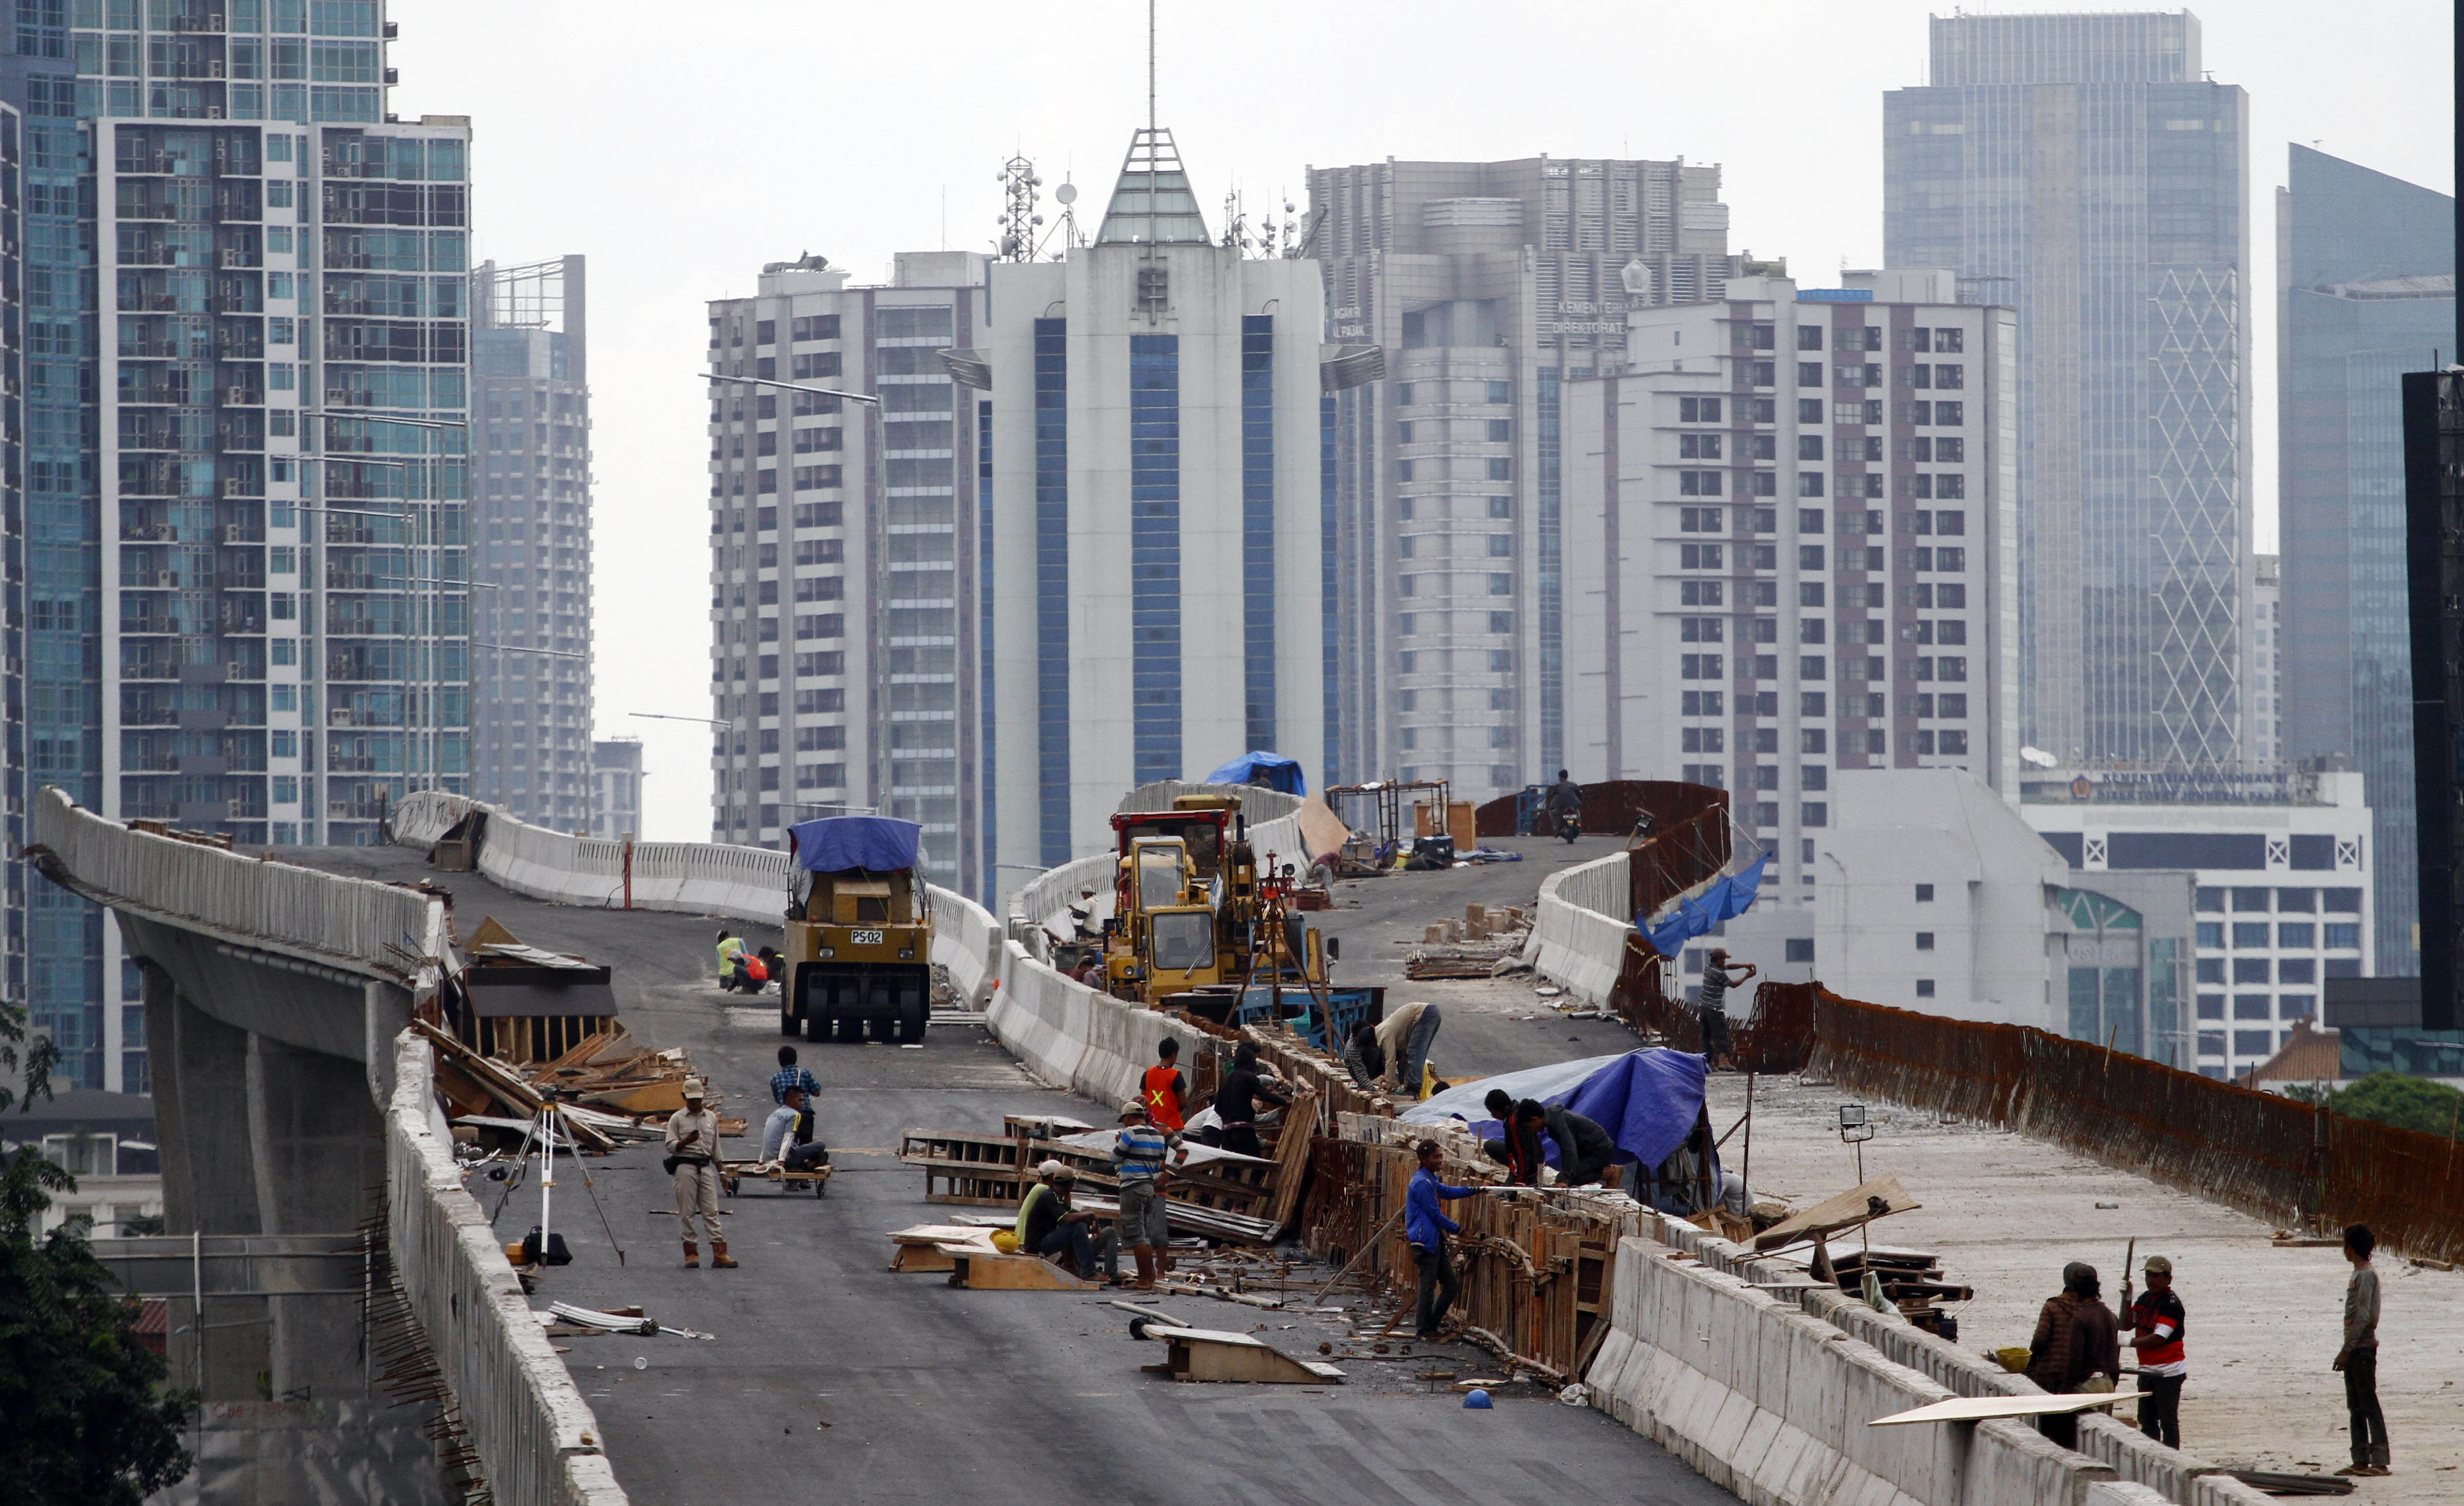 Asean has set up a modest fund for infrastructure, but its needs are substantial. Photo: AP